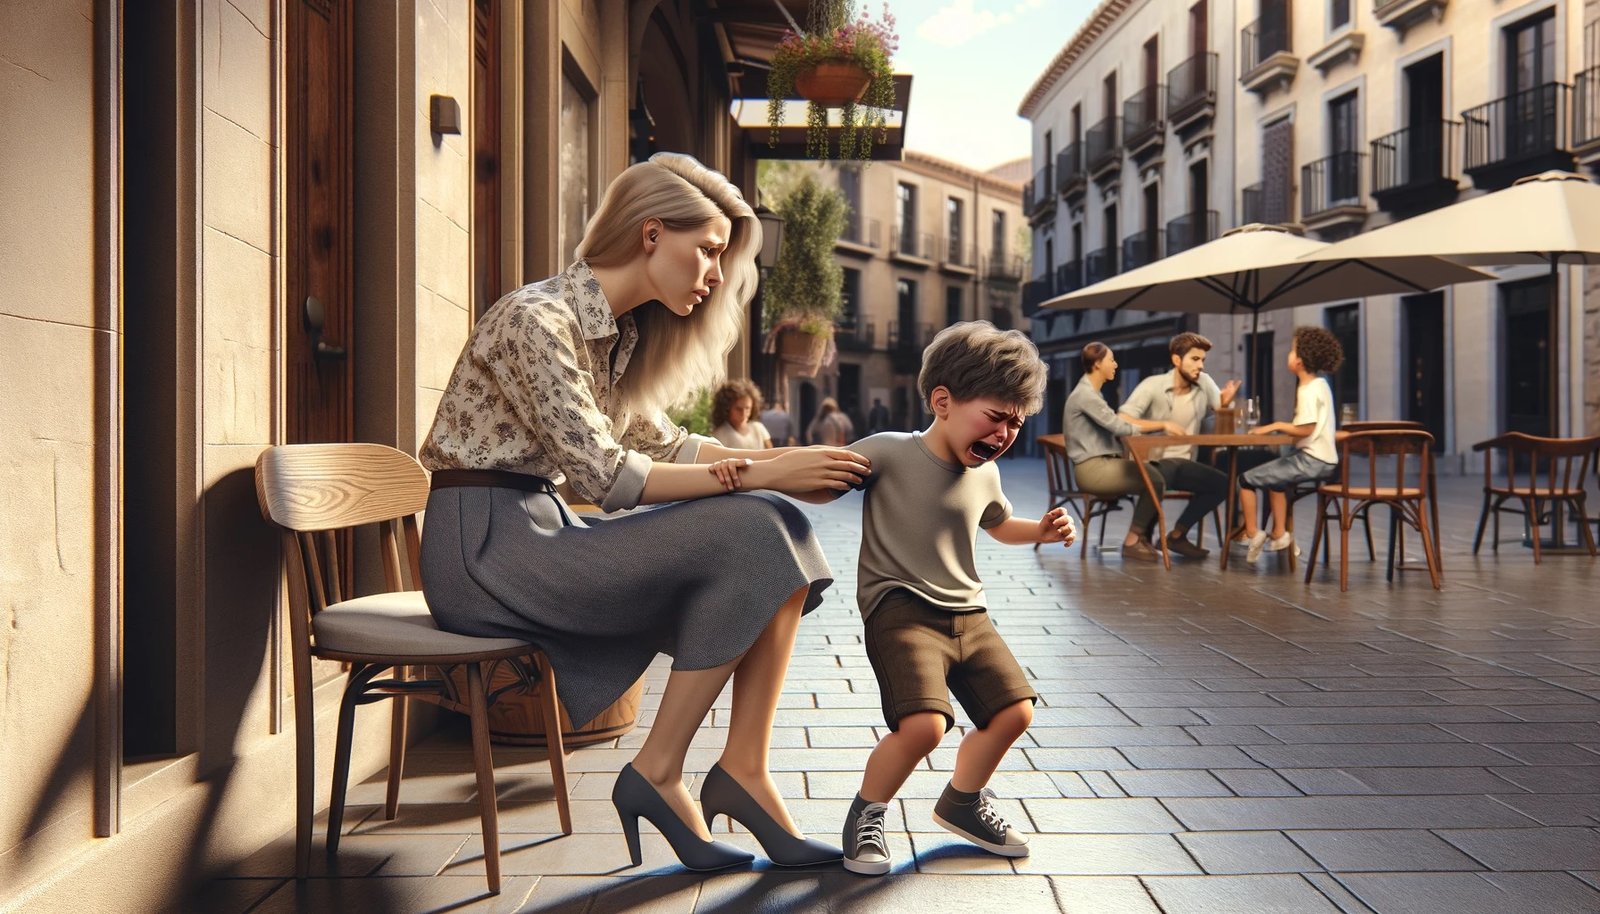 A mother dealing with her misbehaving young son at an outdoor cafe.